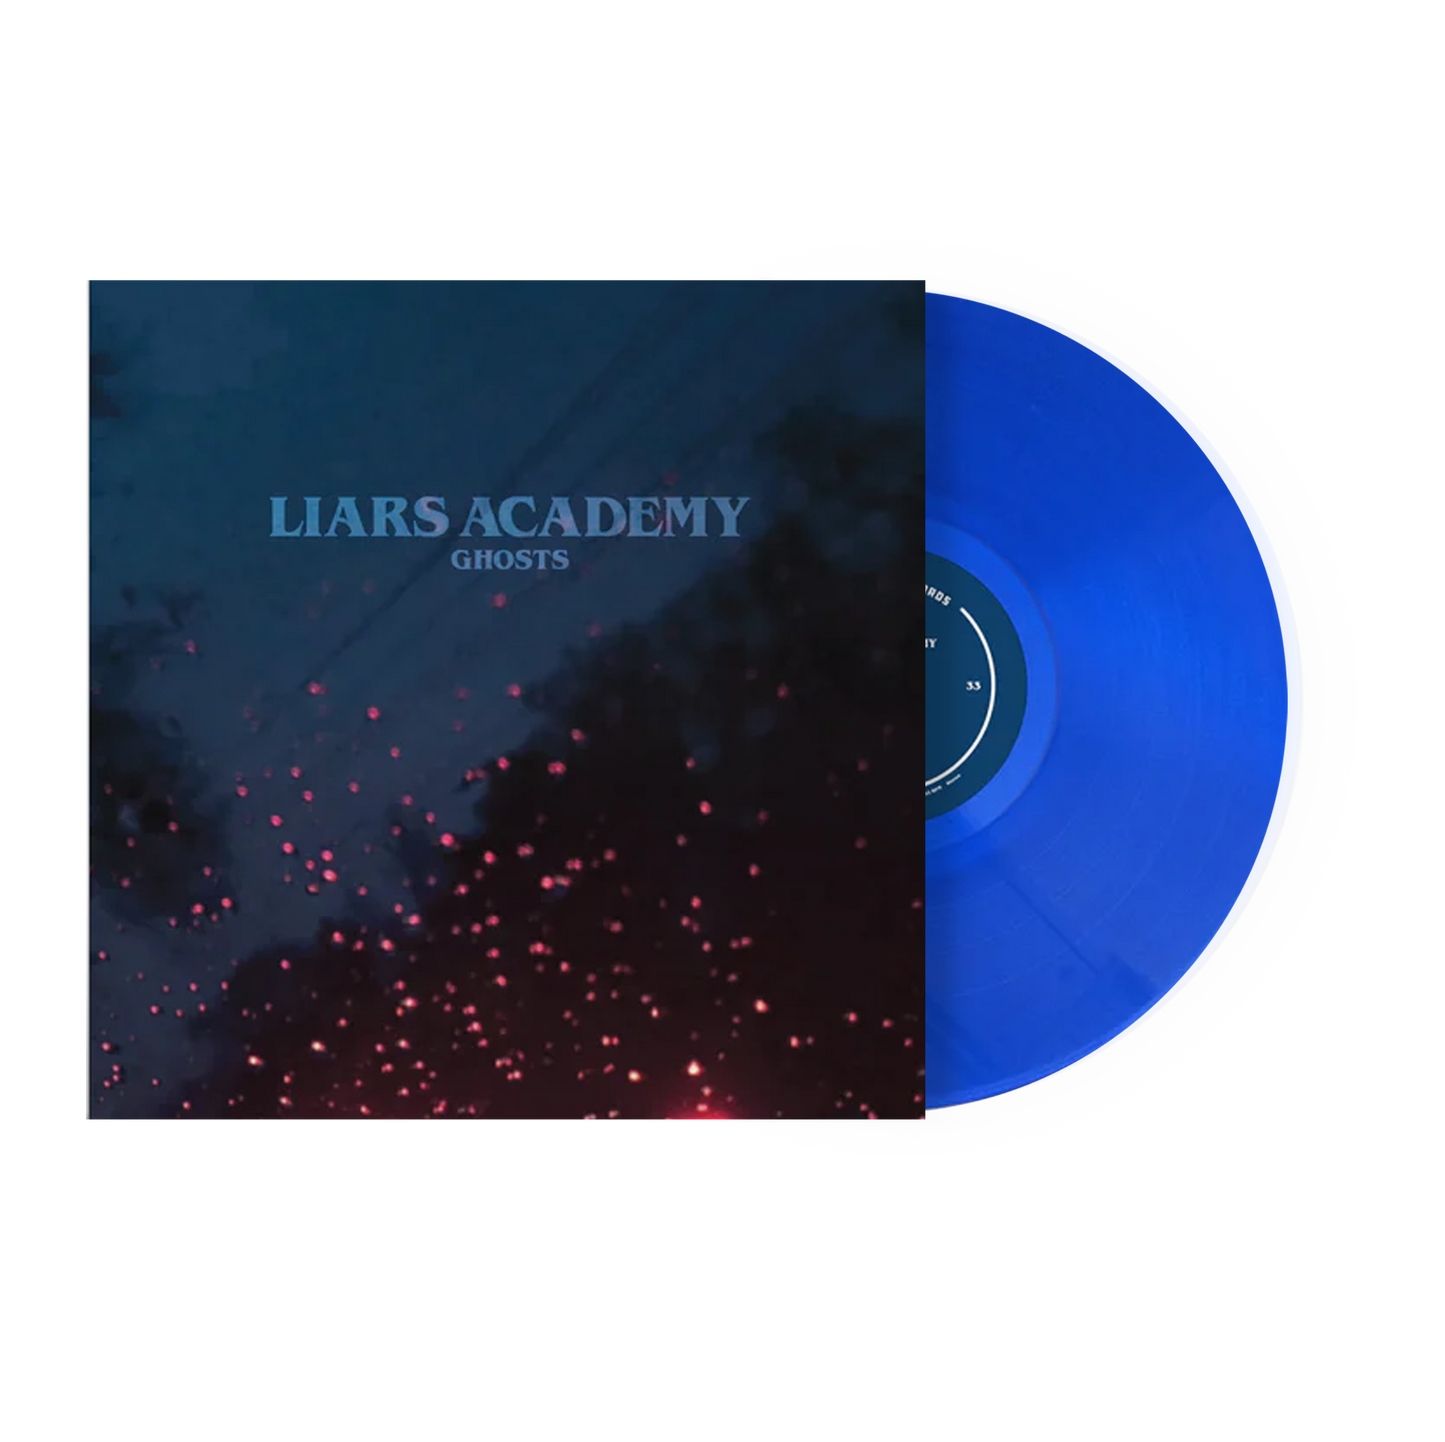 Liars Academy "Ghosts" LP